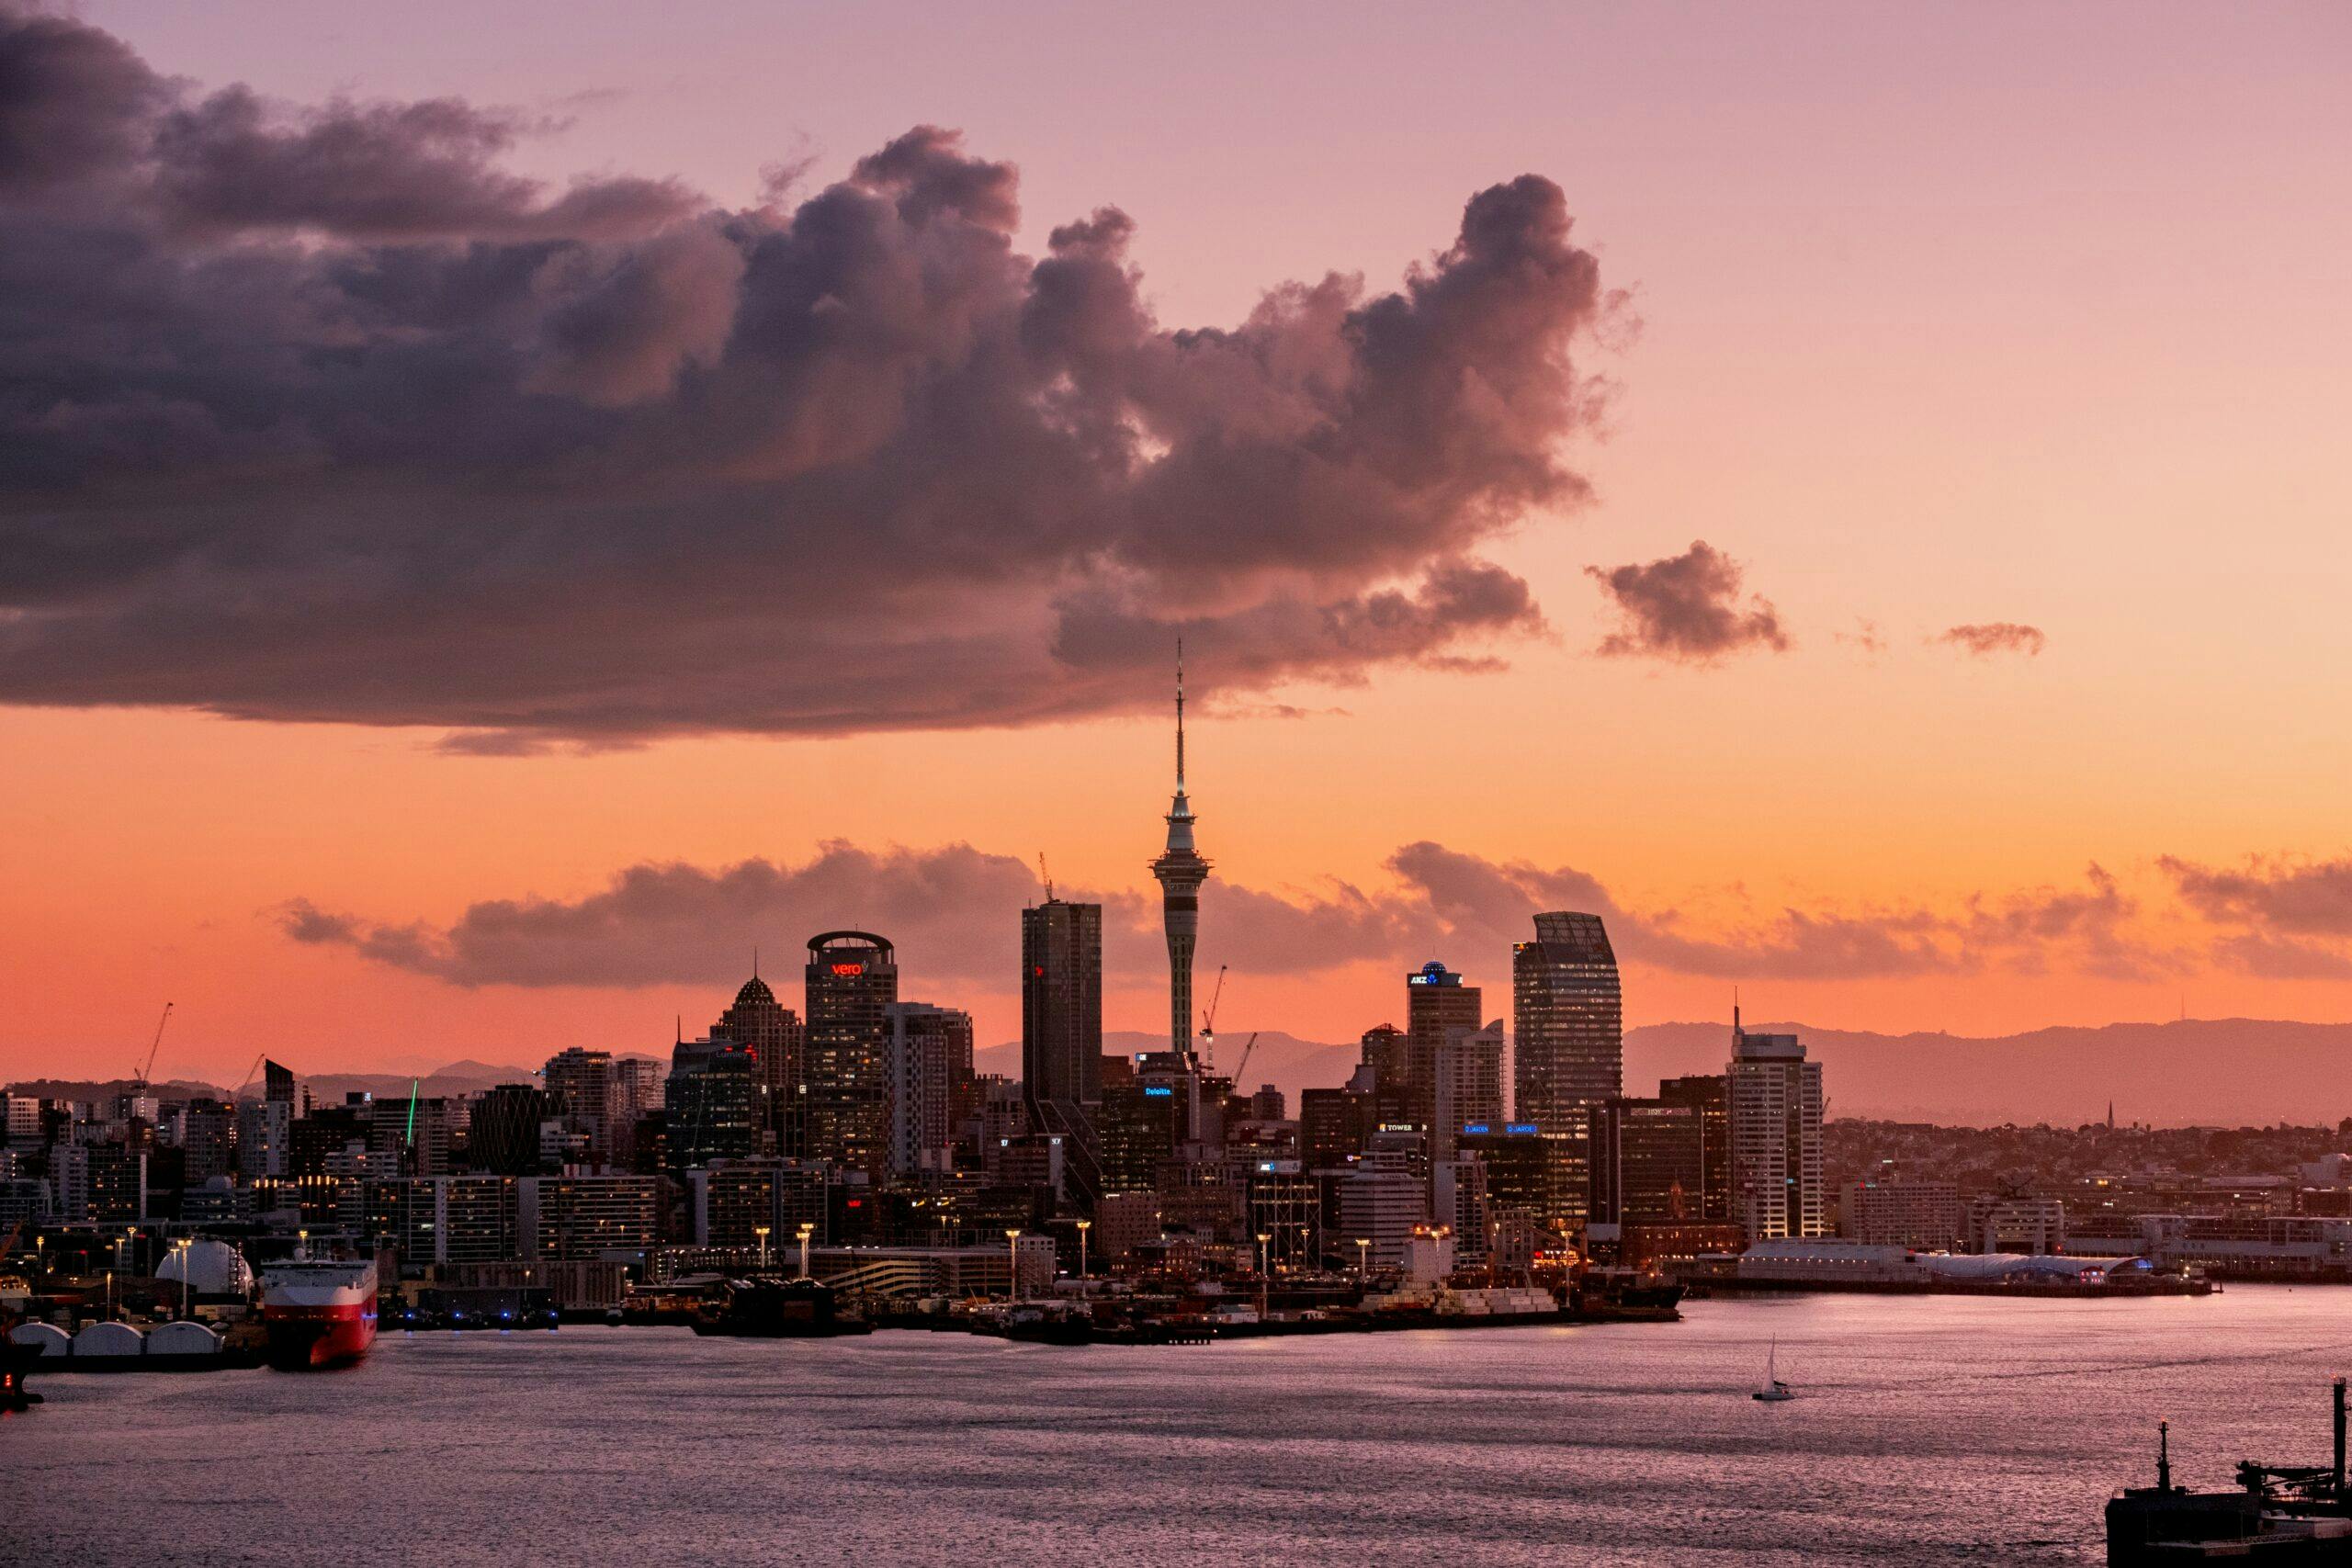 enjoy city skyline under cloudy sky during daytime in Auckland, New Zealand's North Island